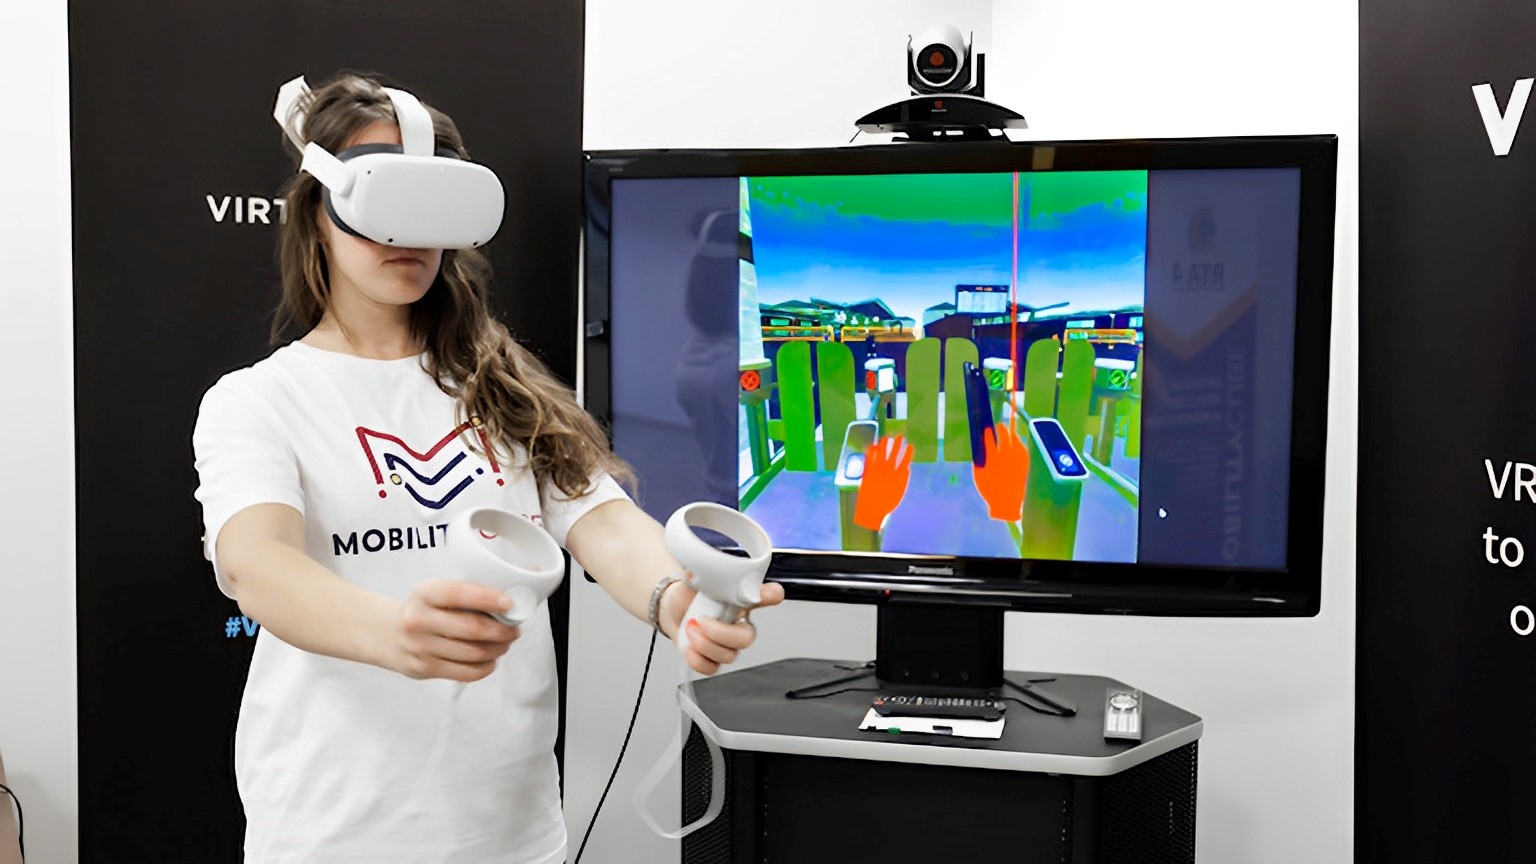 McMaster Engineering partners with Virtualware to introduce their first ever VR room in Canada